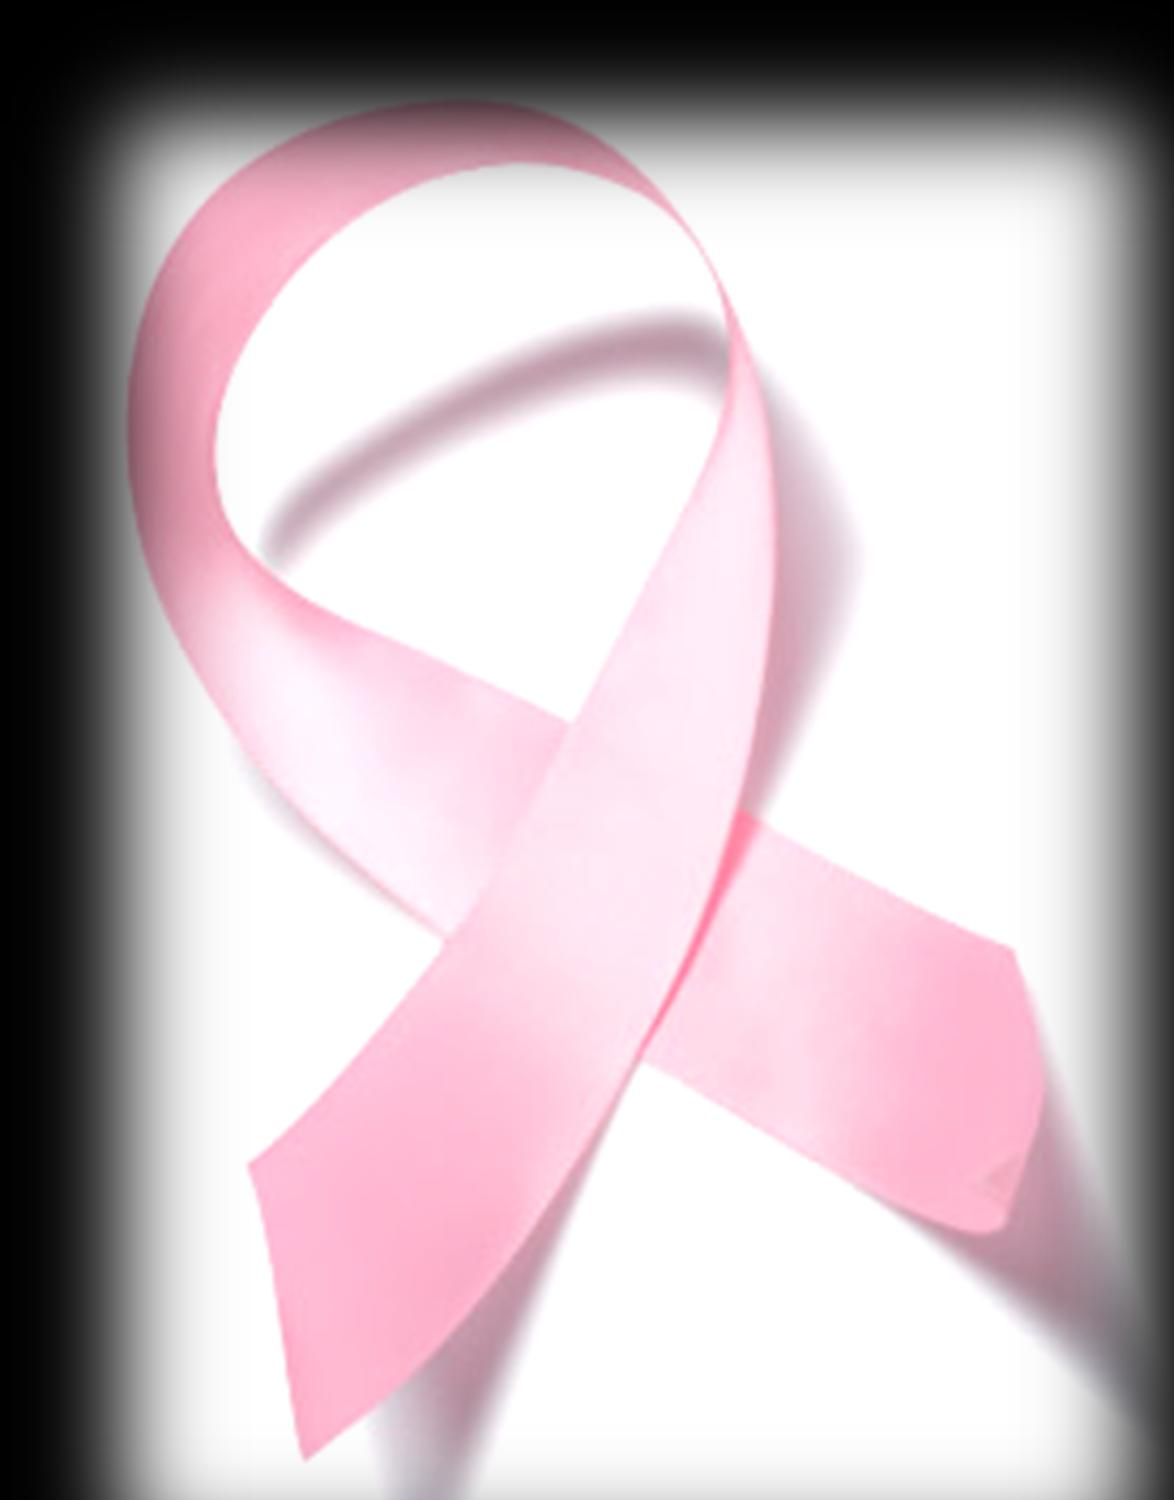 breast cancer: RCT T.S. Le